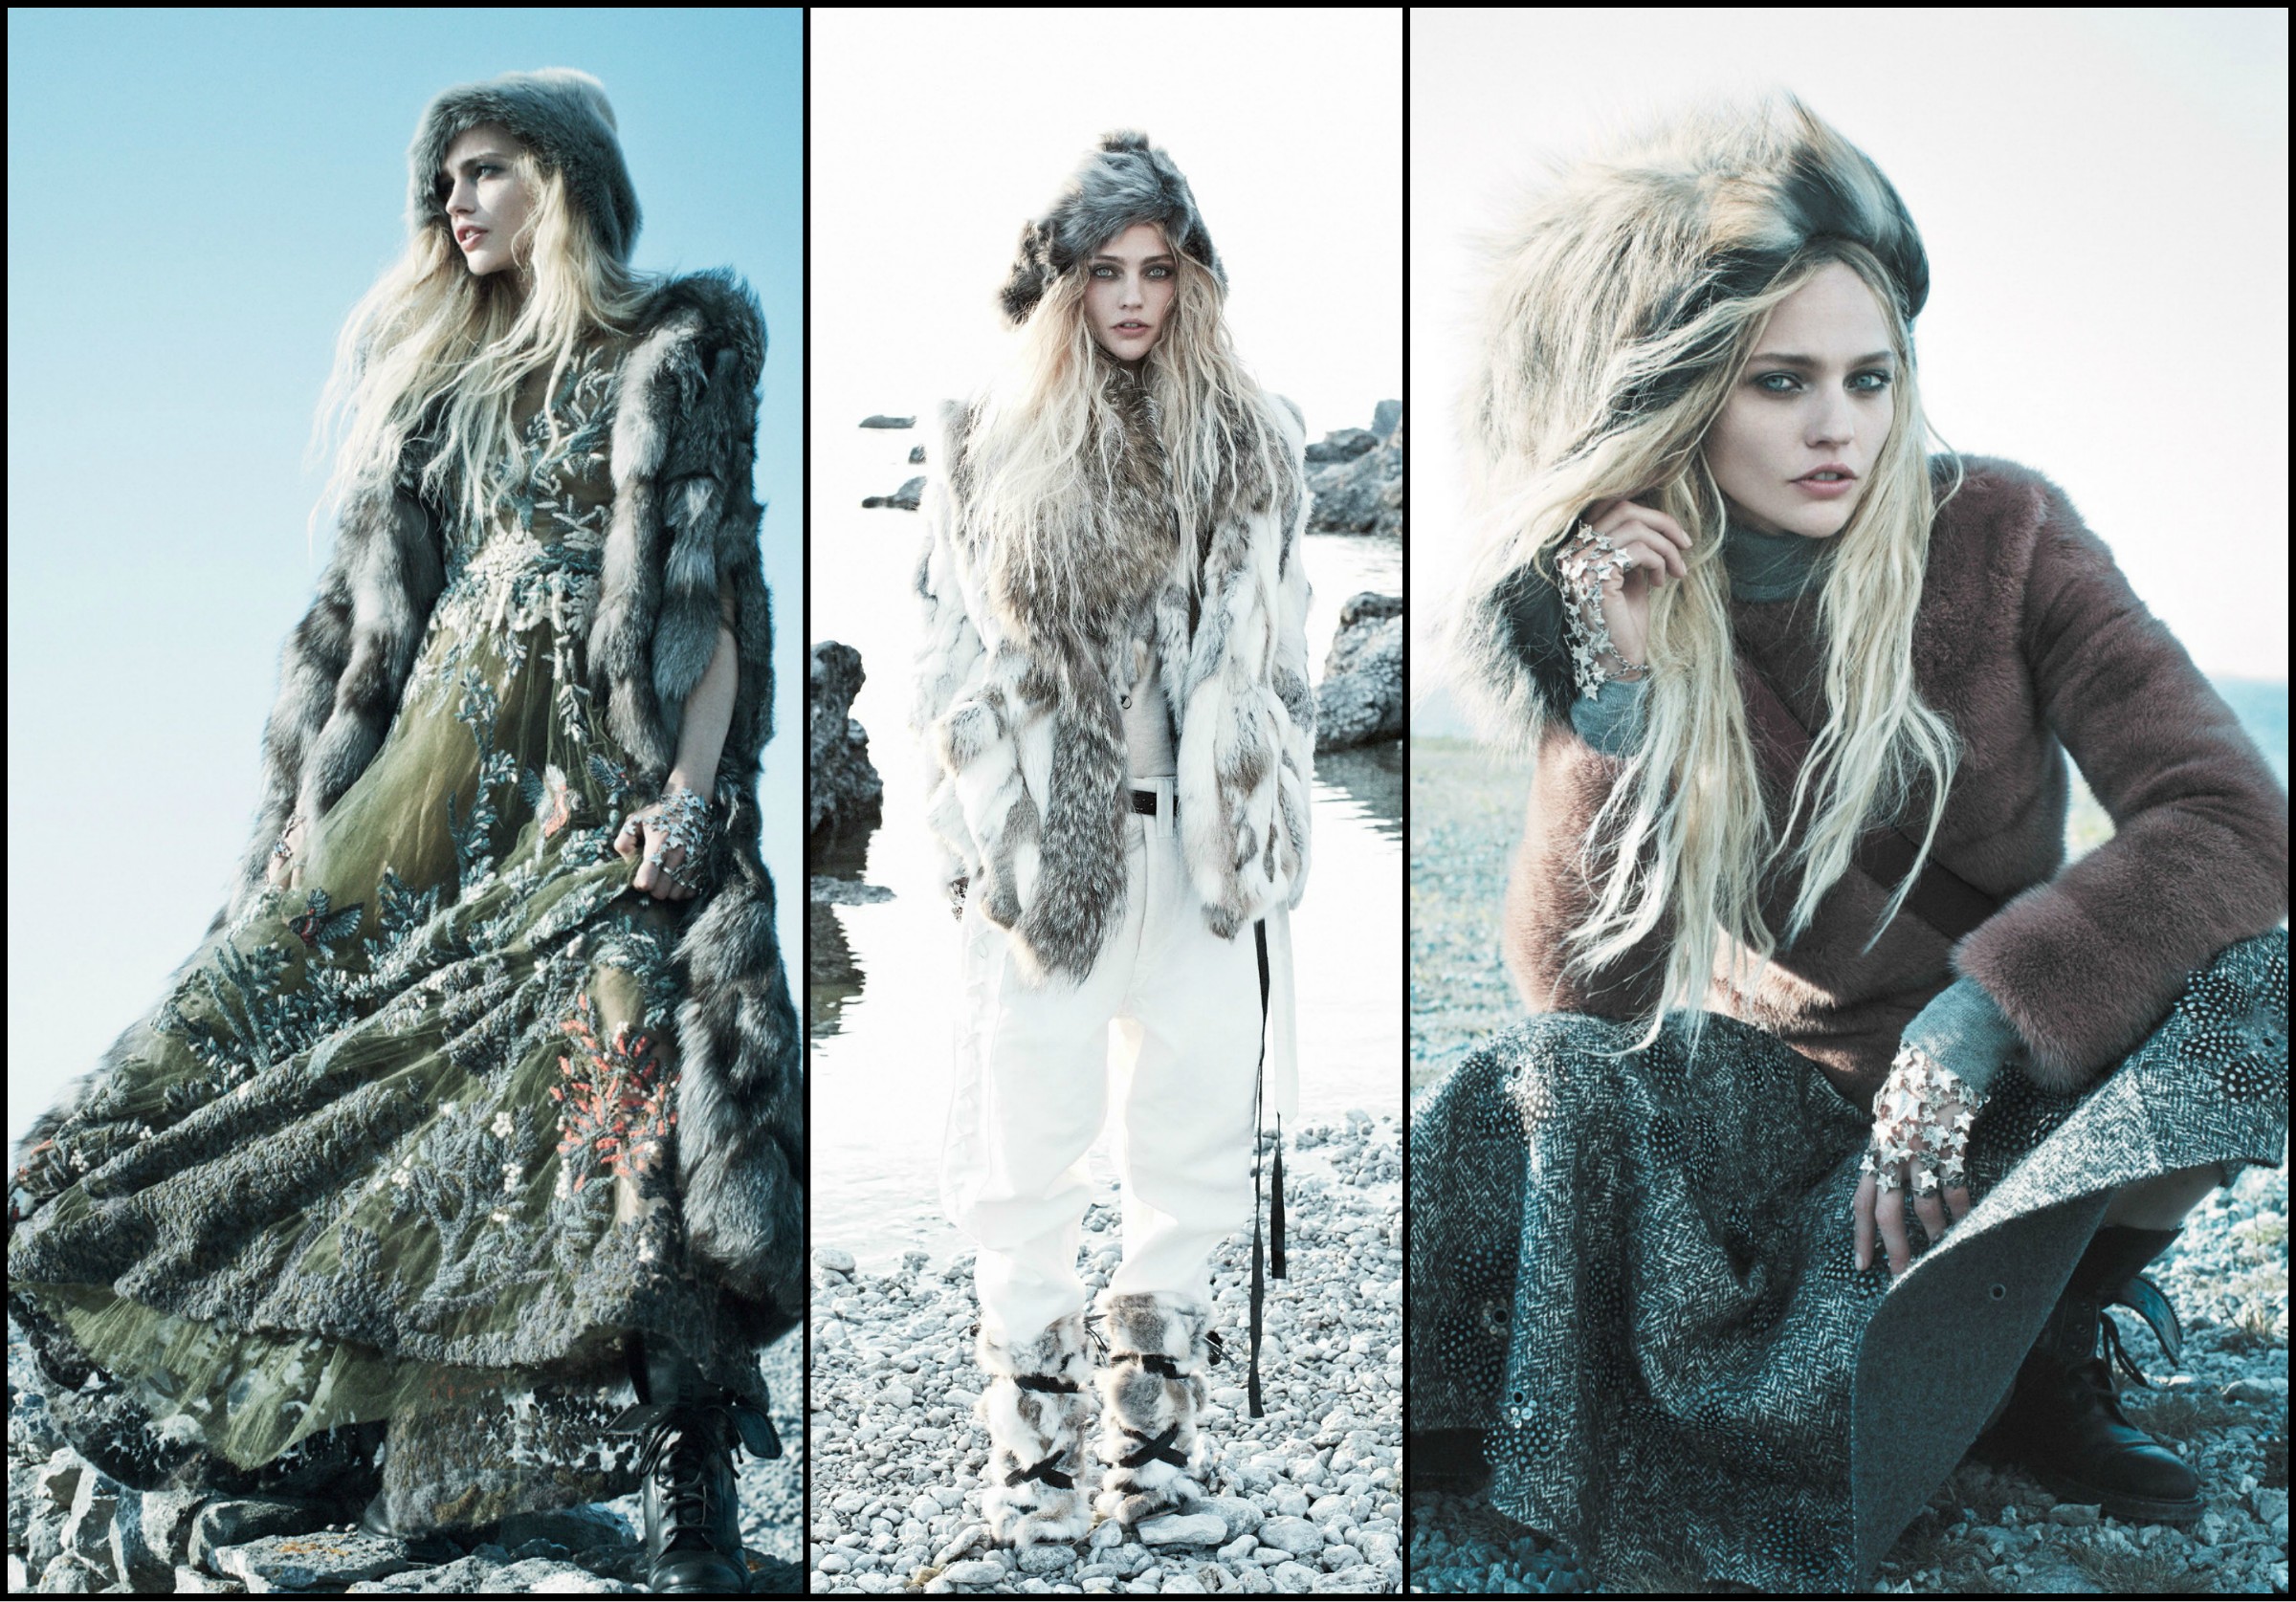  Call of the wild  Vogue us